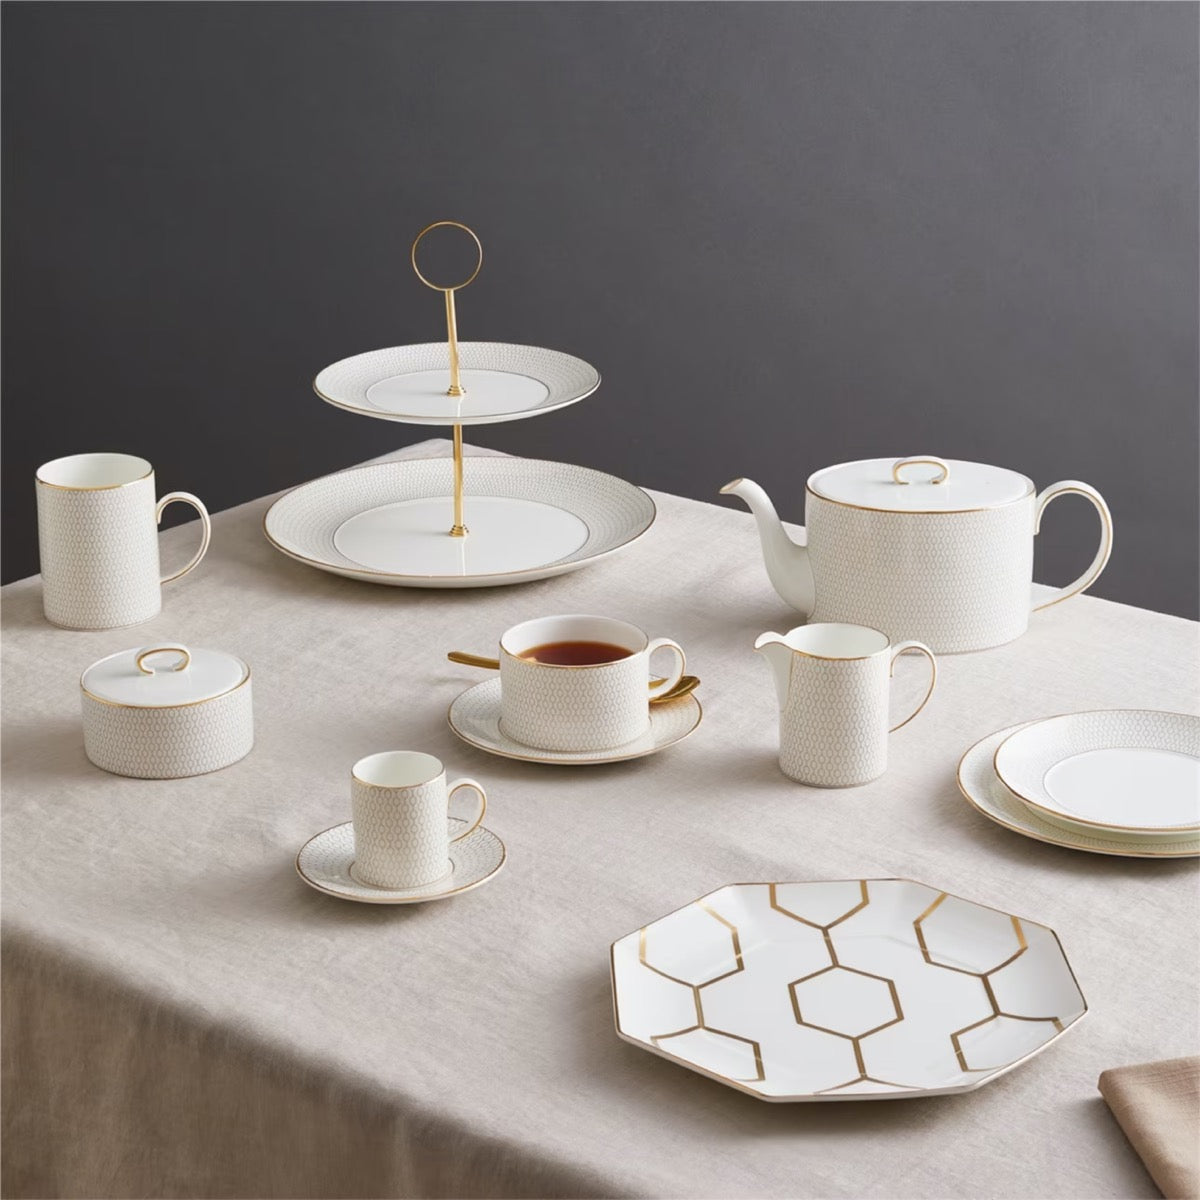 Luxury Wedgwood Gio Gold 2 Tier Cake Stand 